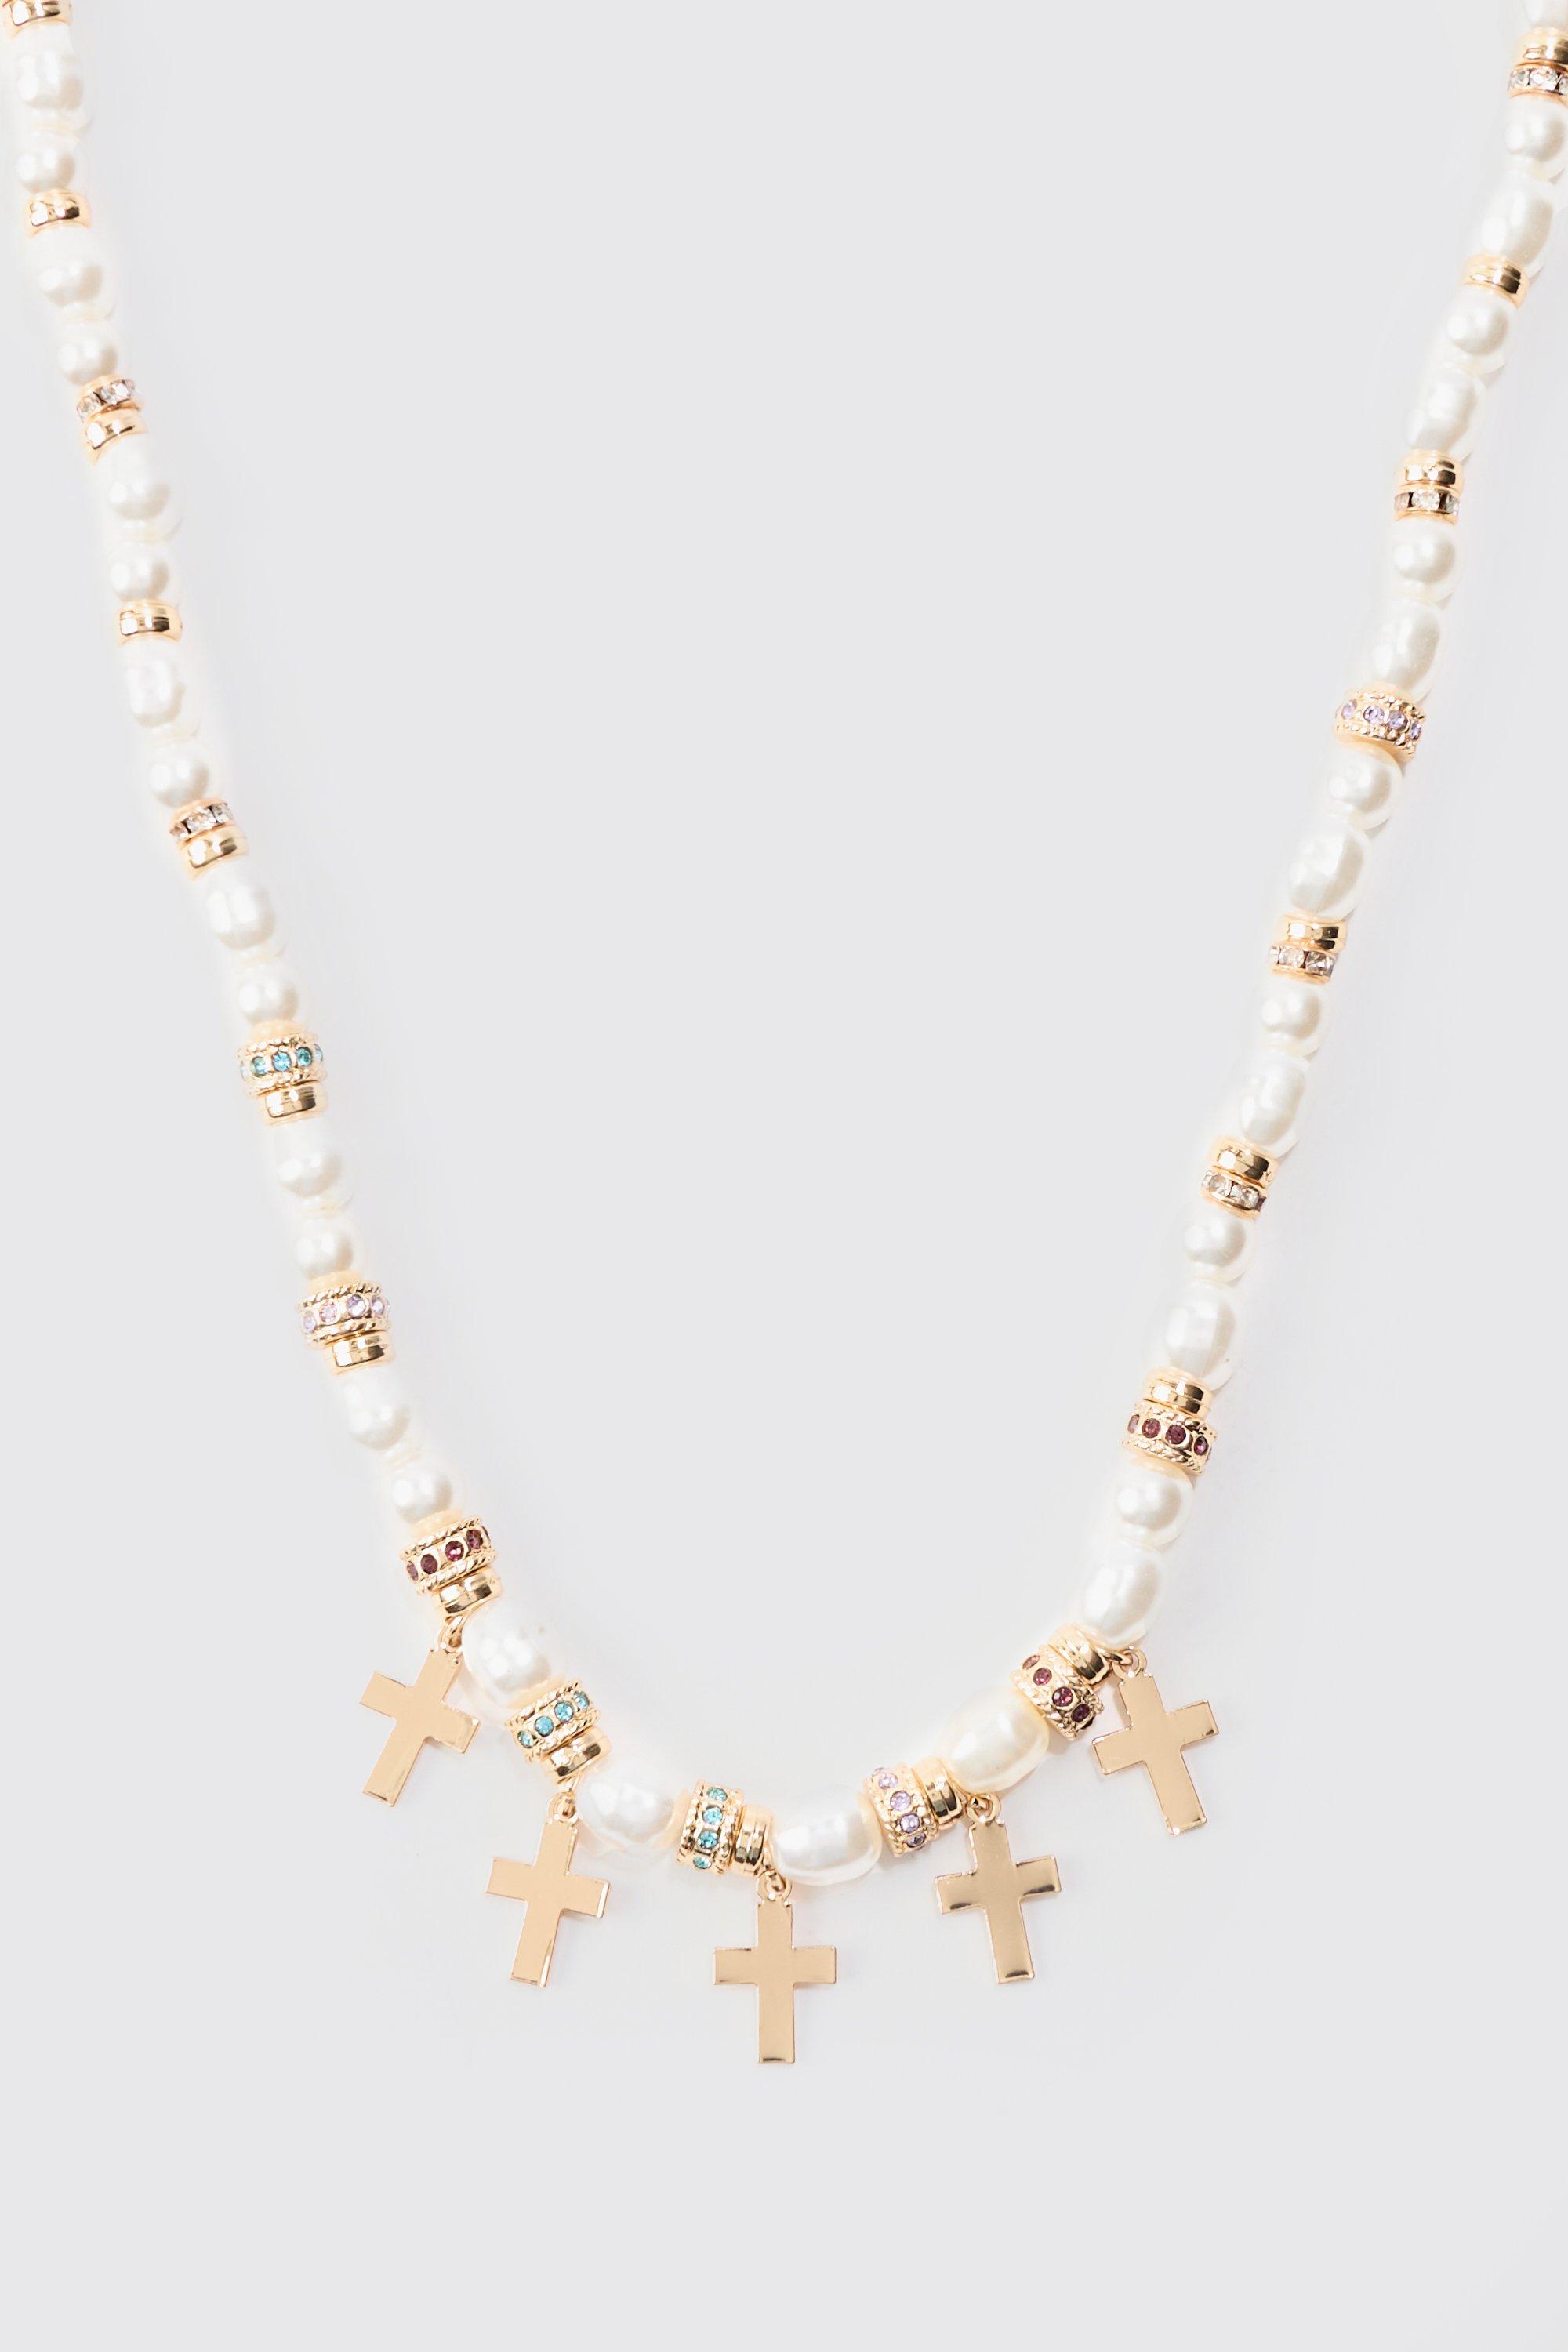 Image of Pearl Bead Necklace With Cross Charms In Gold, Metallics